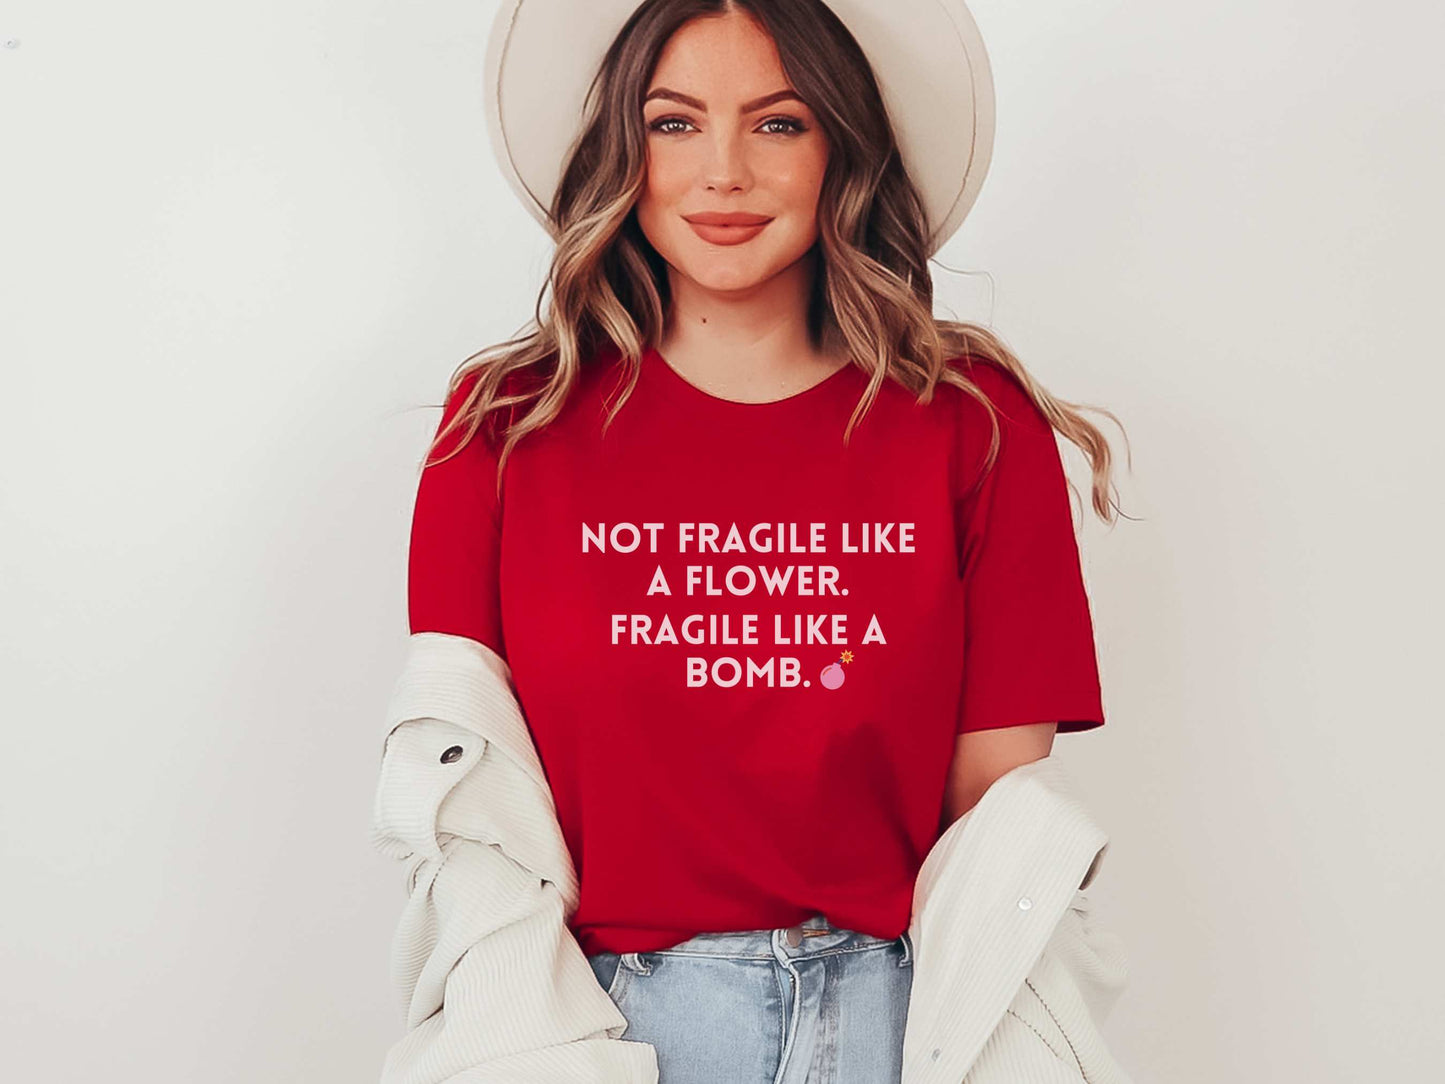 Fragile Like a Bomb Frida Kahlo T-Shirt in Red